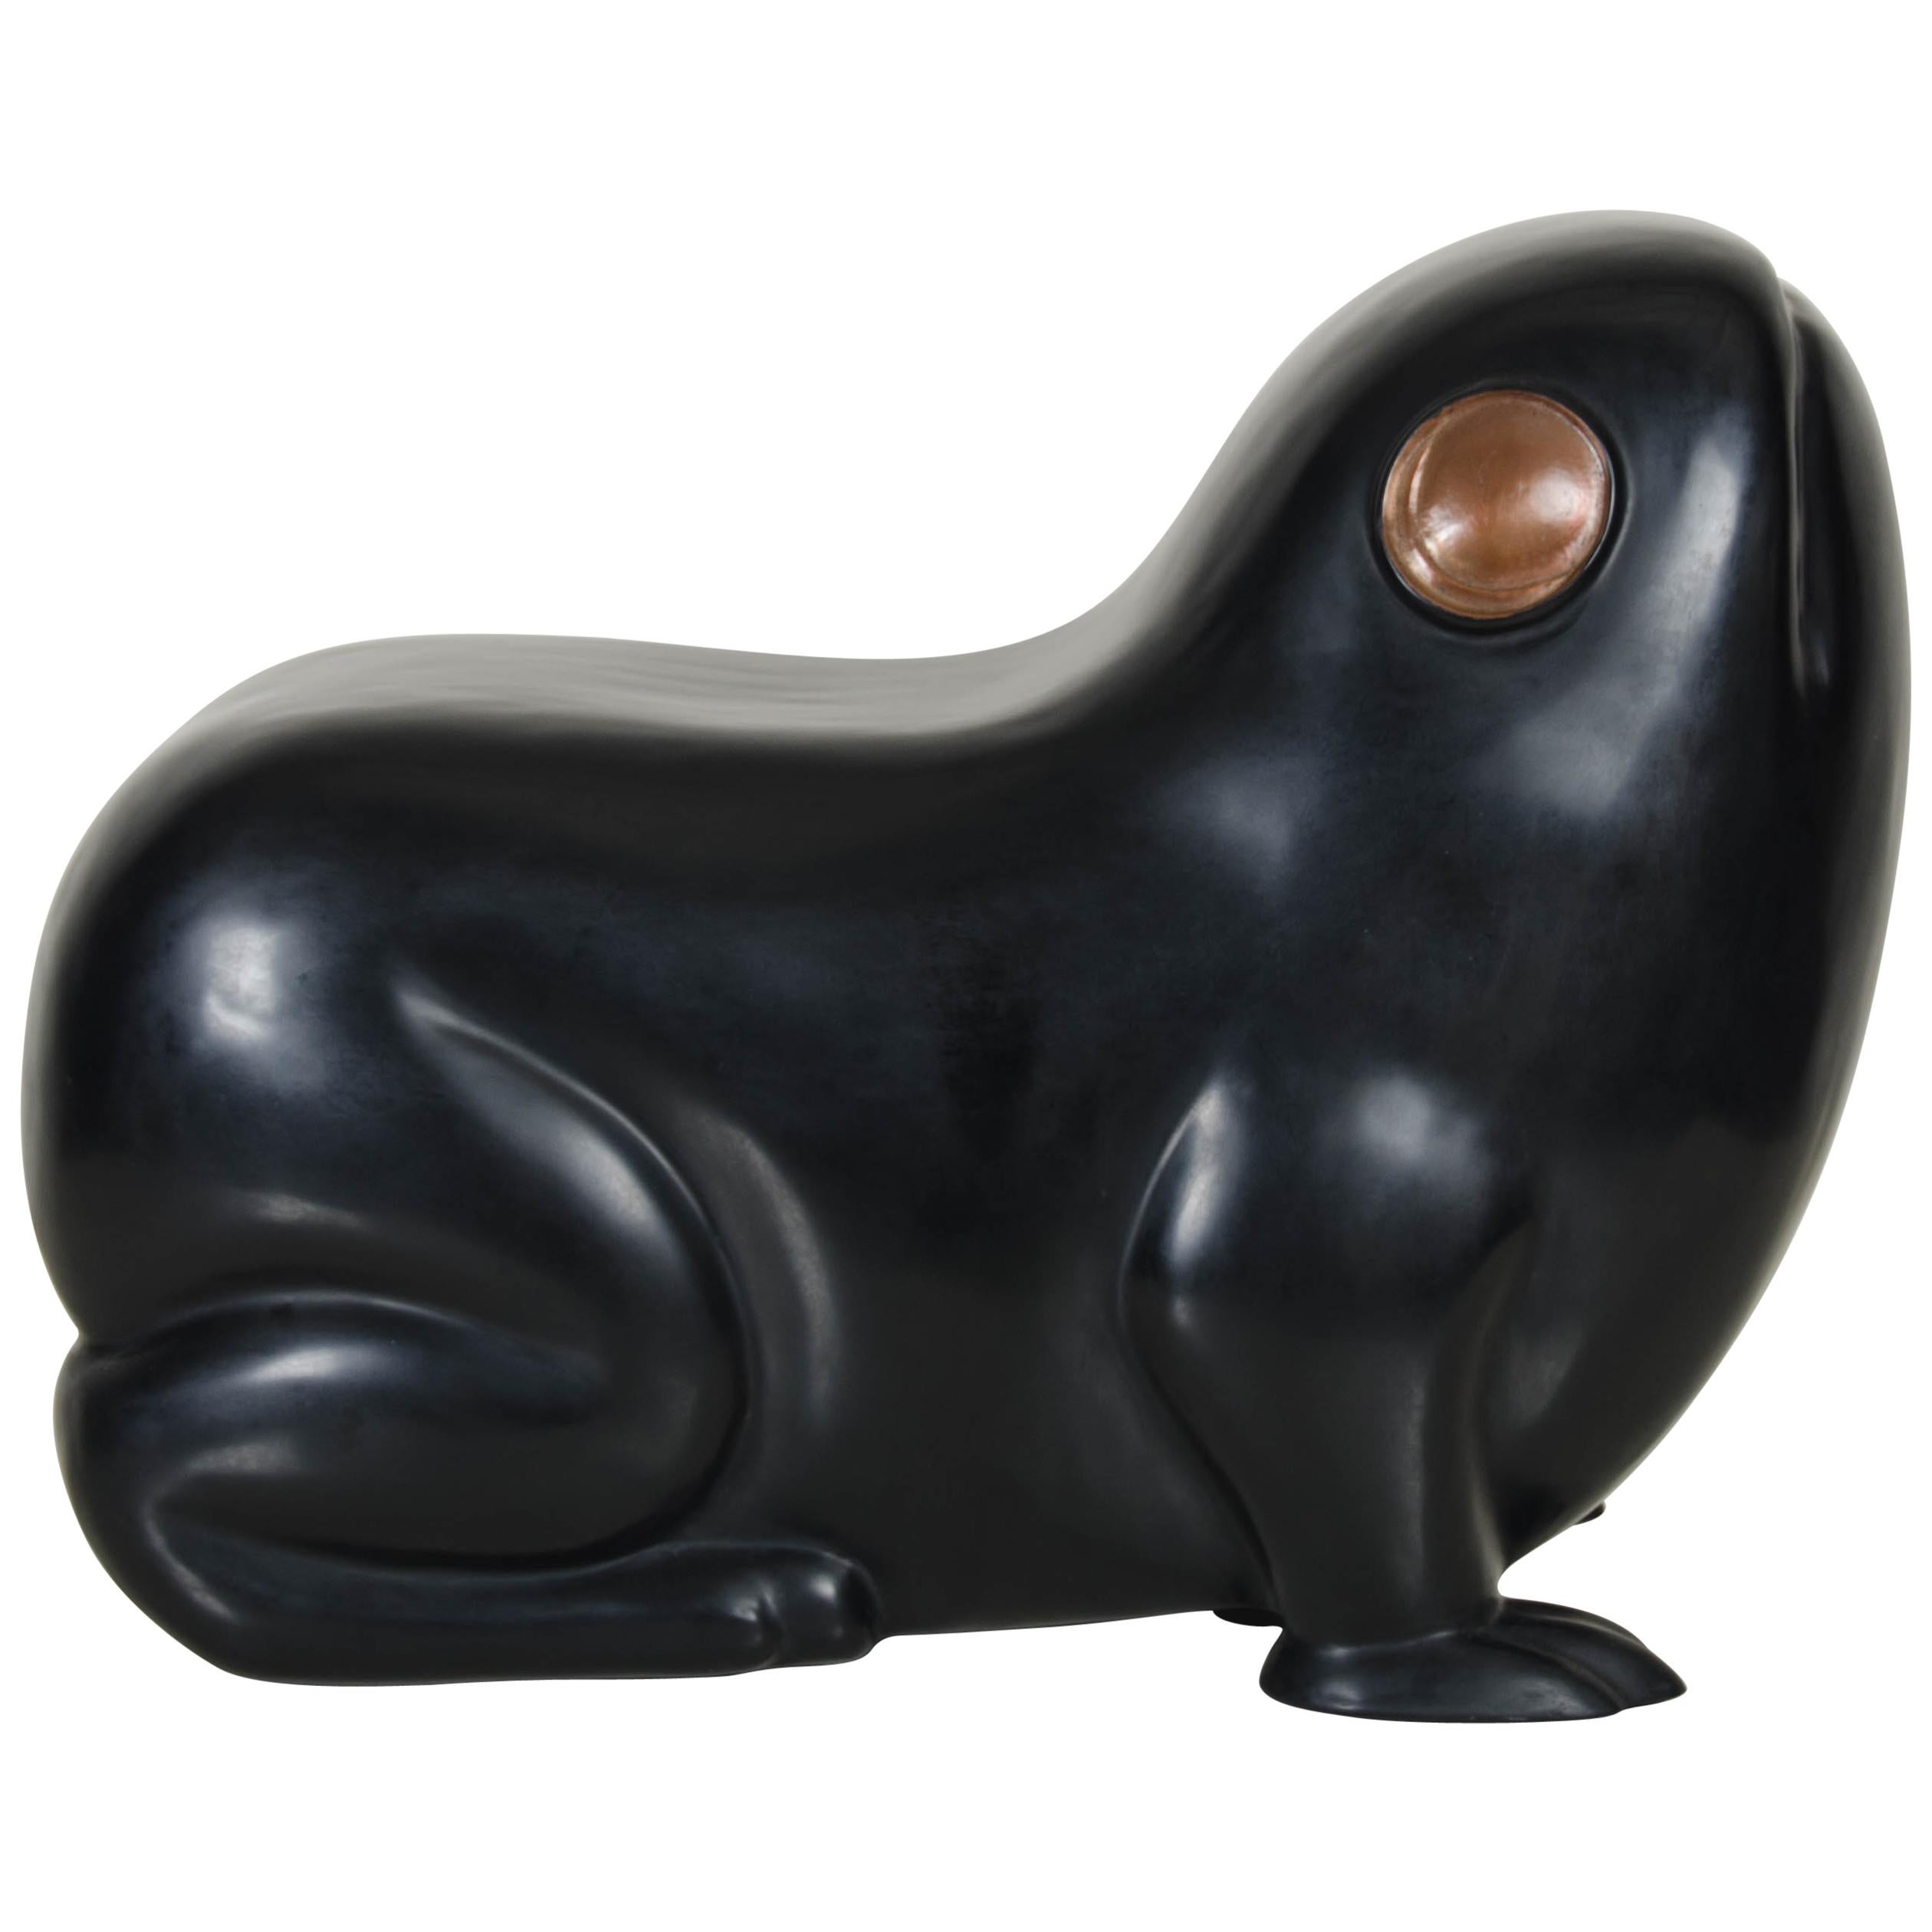 Frog Seat, Black Lacquer by Robert Kuo, Hand Repousse, Limited Edition For Sale